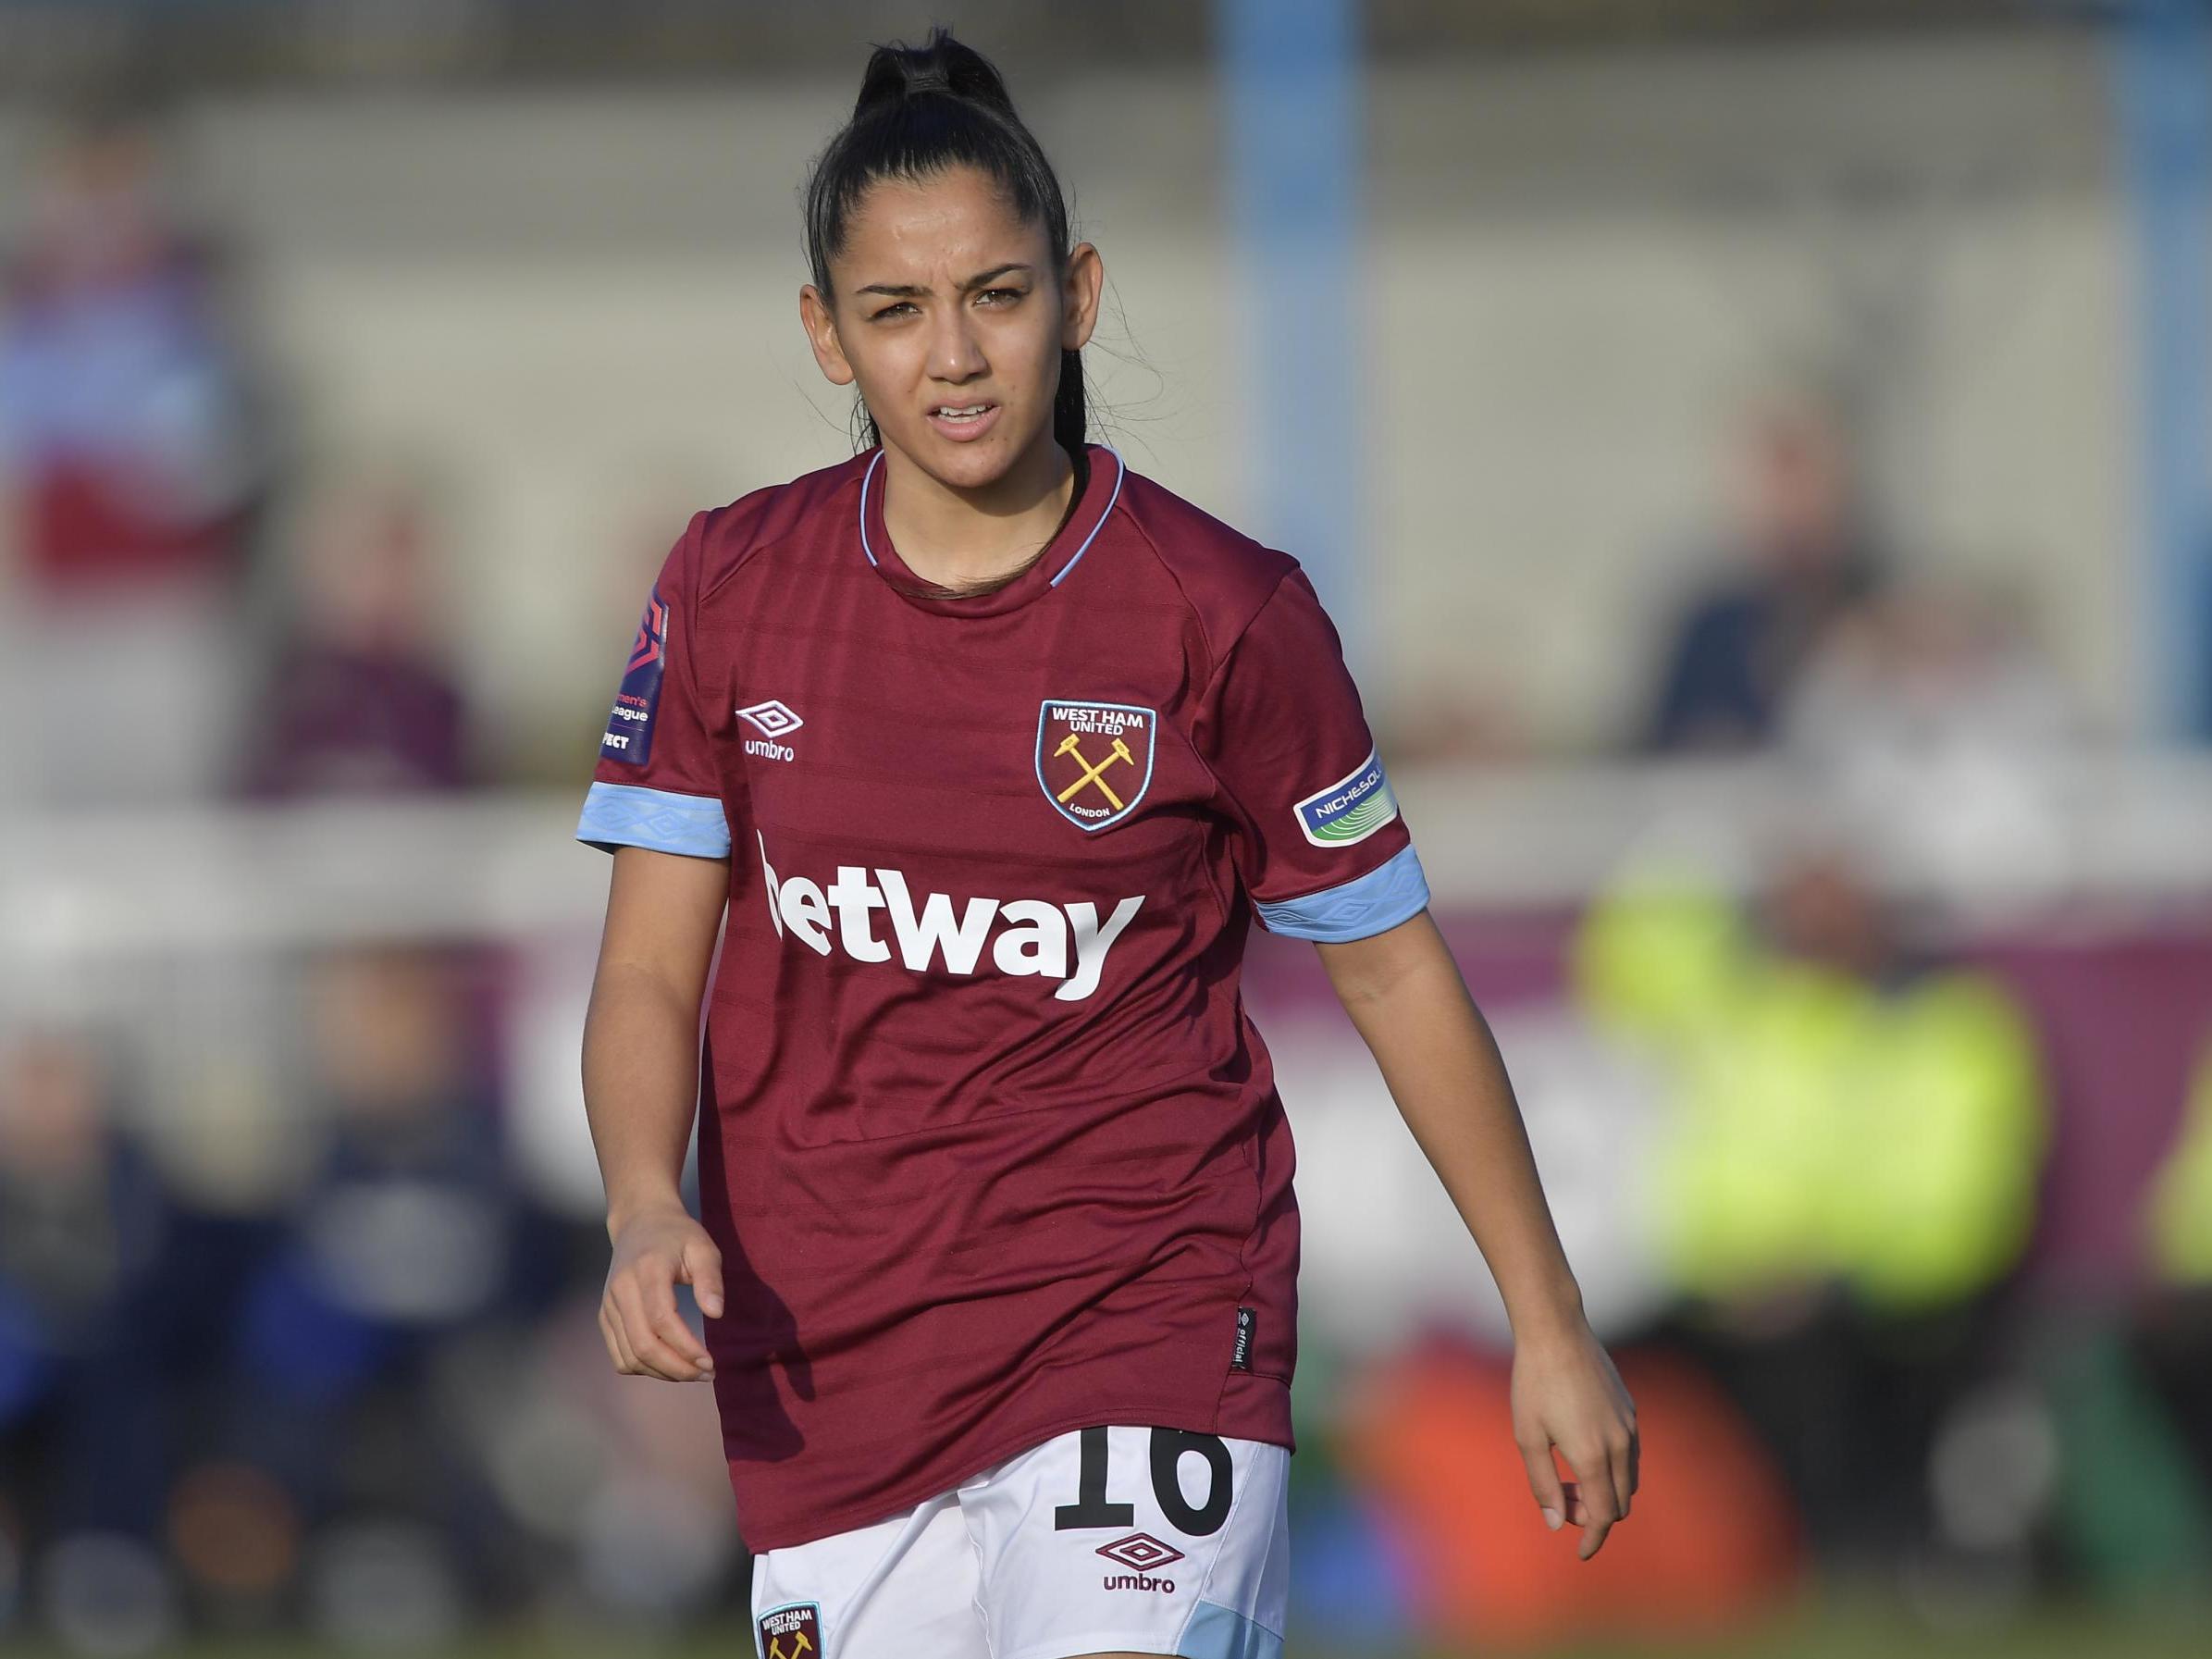 West Ham winger Kmita is determined to fulfil her own dream